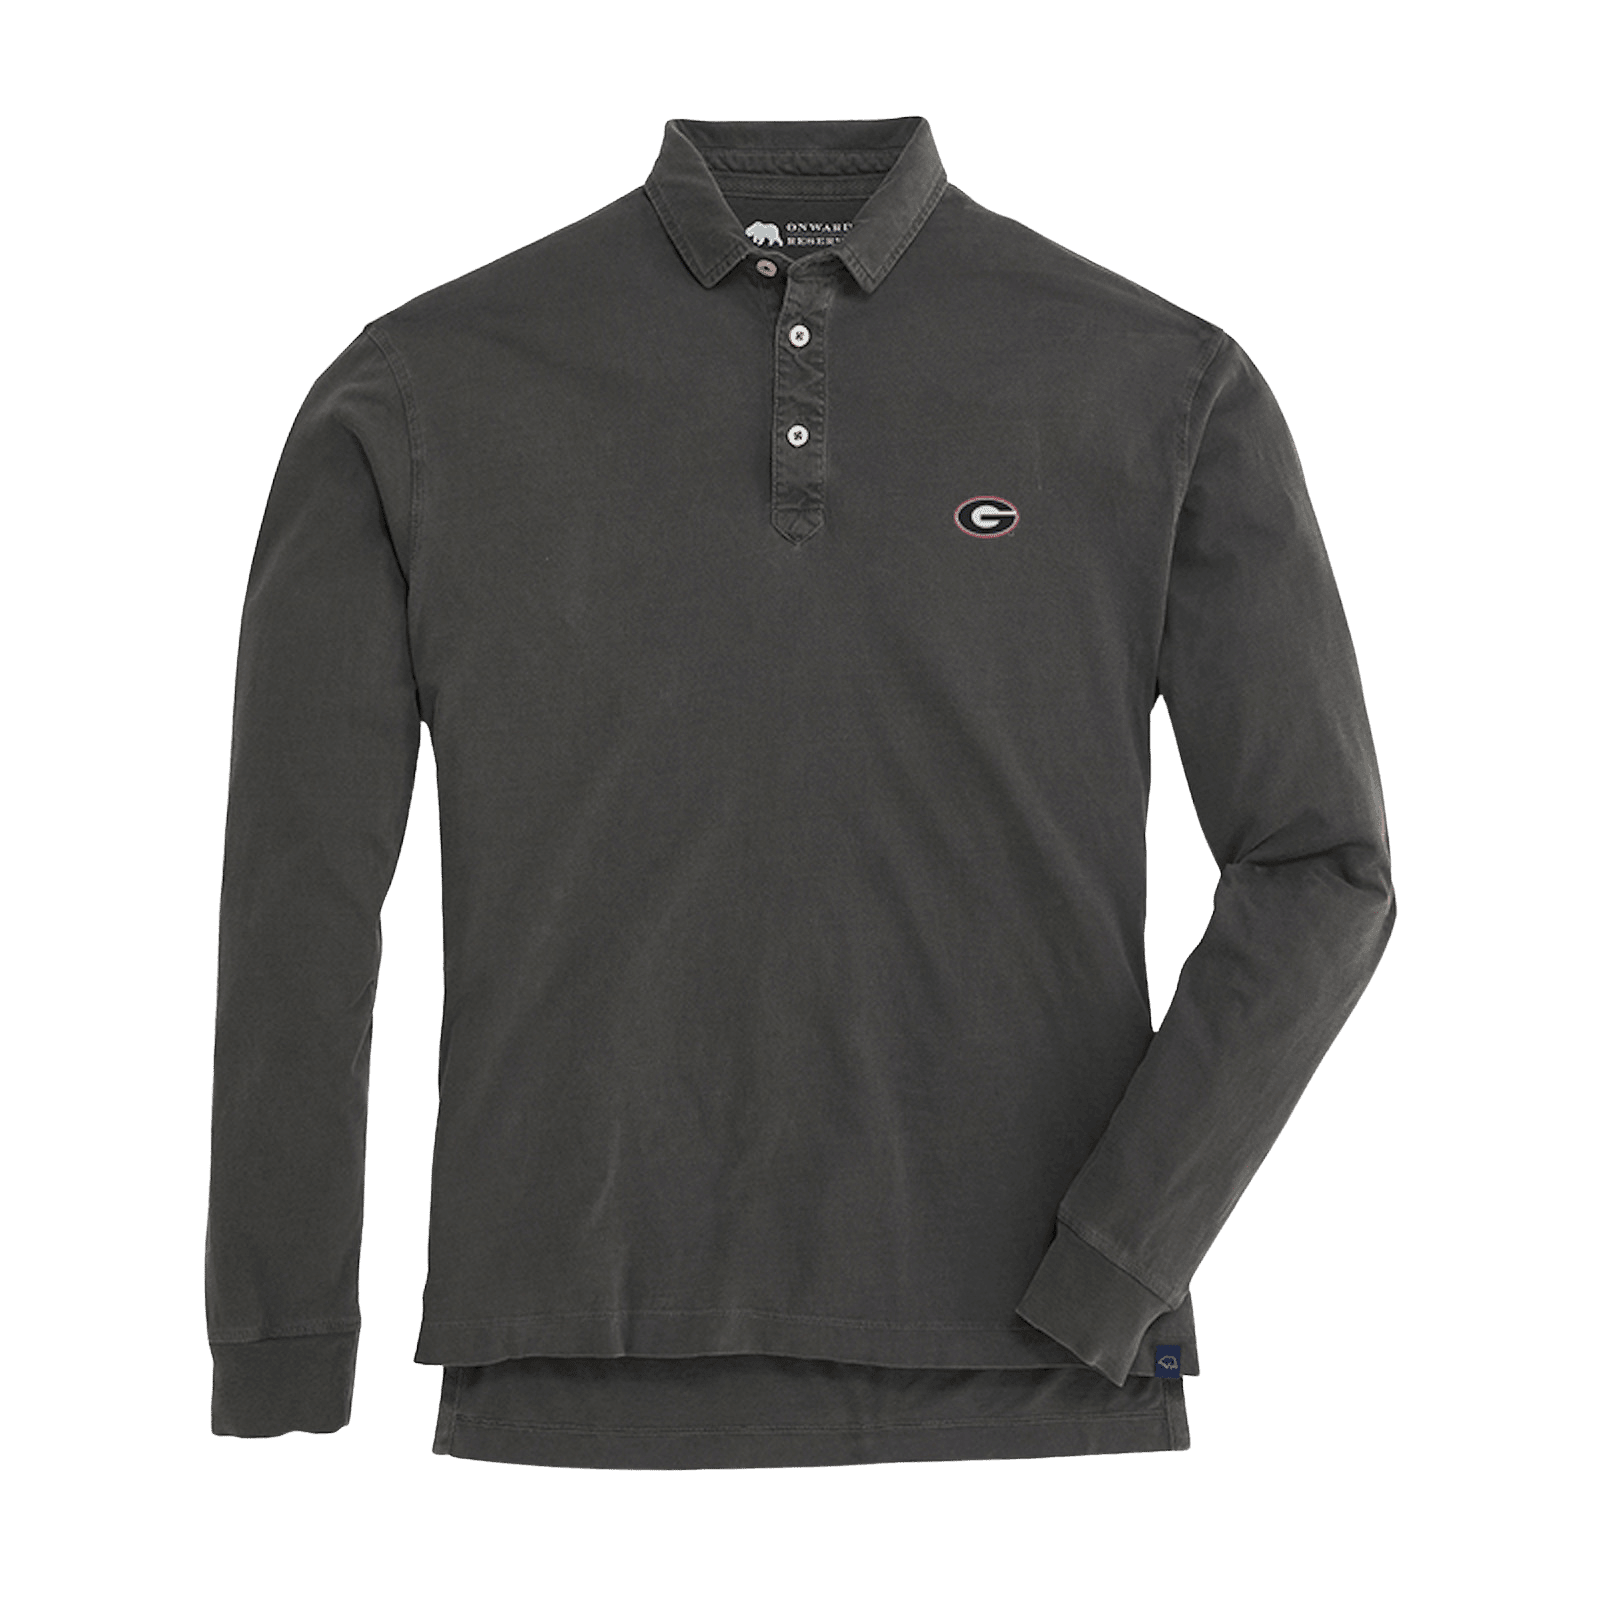 Super G Perry Long Sleeve Polo - Onward Reserve